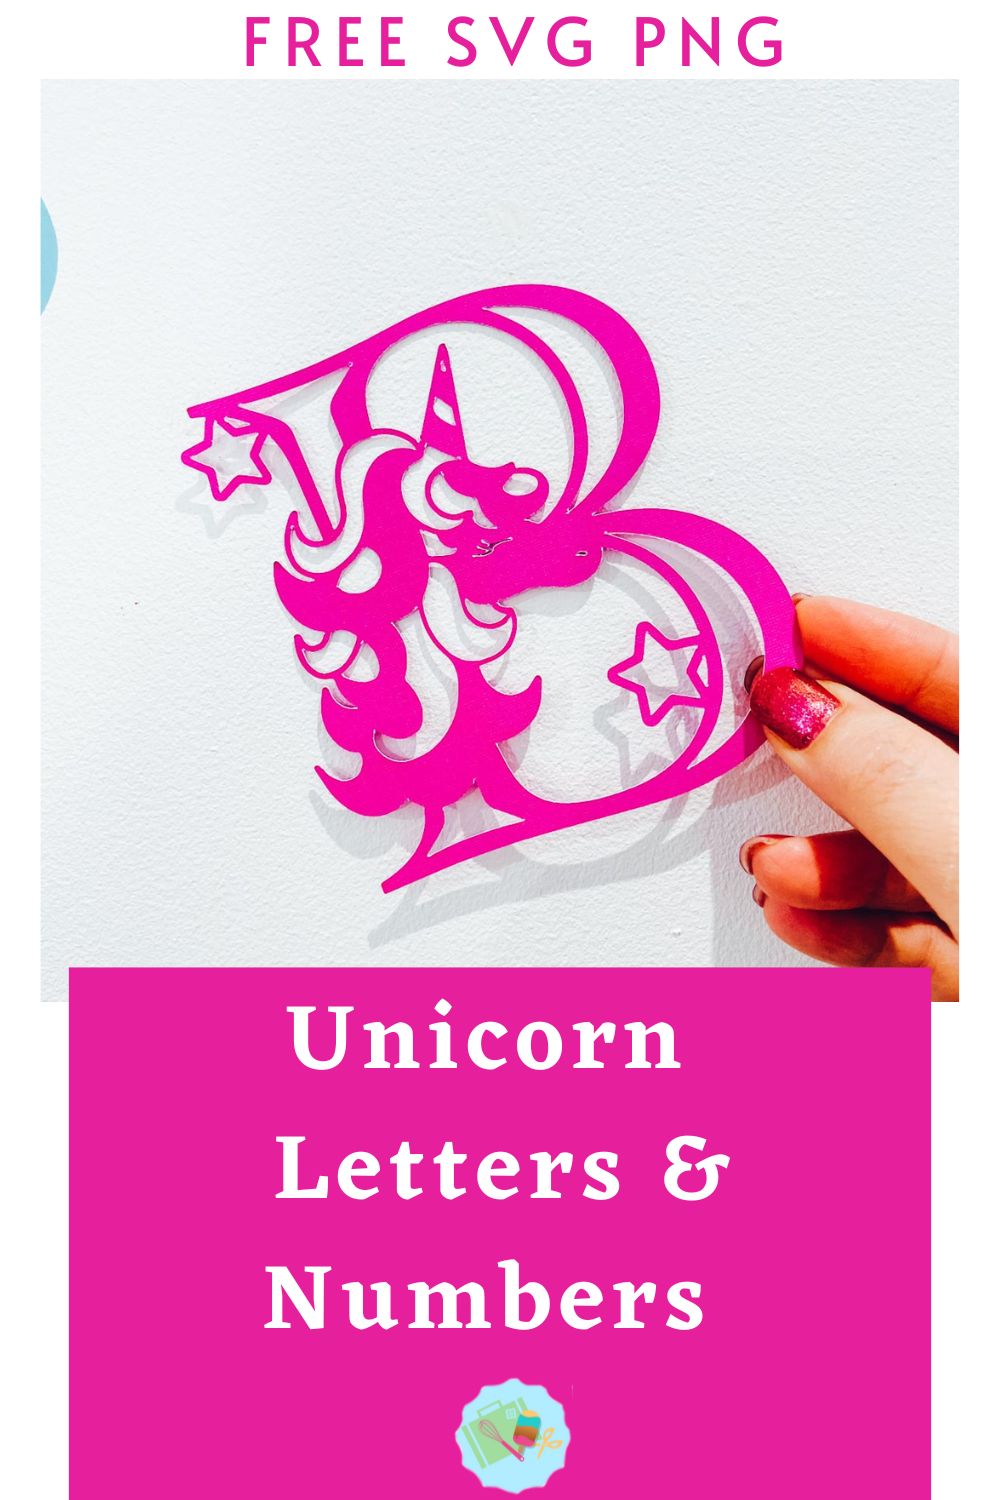 Free SVG Layered Unicorn for Cricut and Silhouette for crafting and scrapbooking